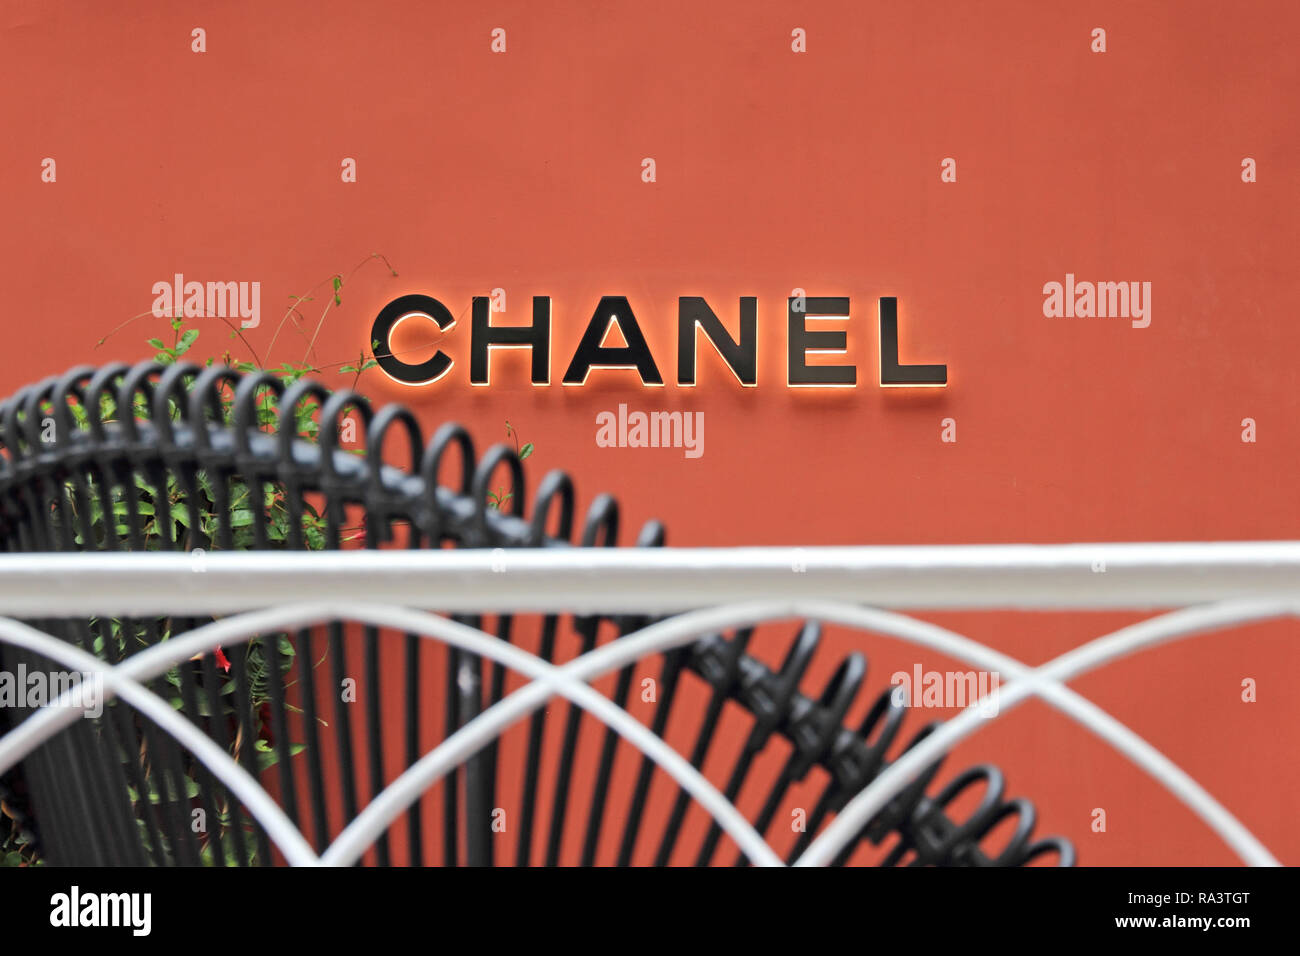 Chanel sign Stock Photo